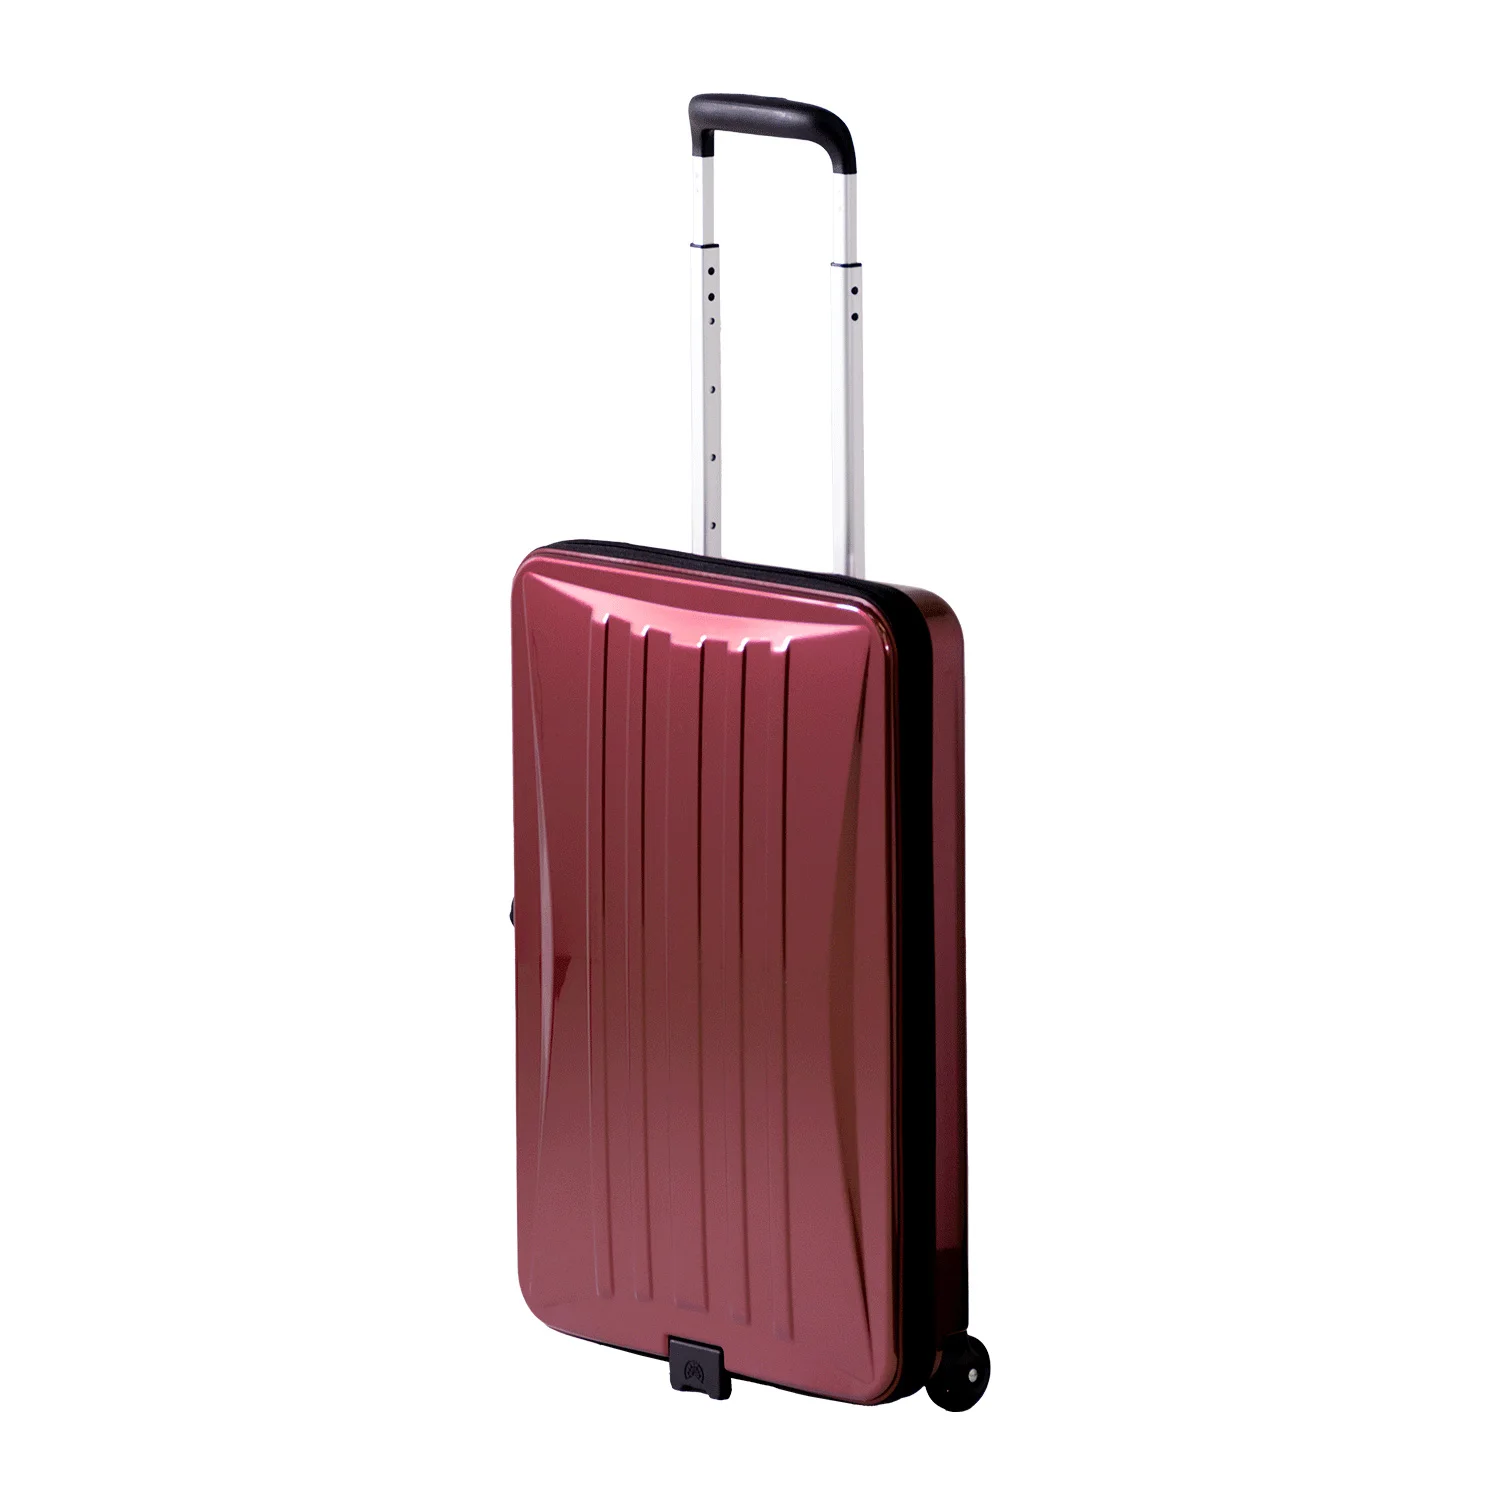 Folding Luggage Rolling Password Luggage Can Ease The Storage Of A 20-Inch Portable Suitcase